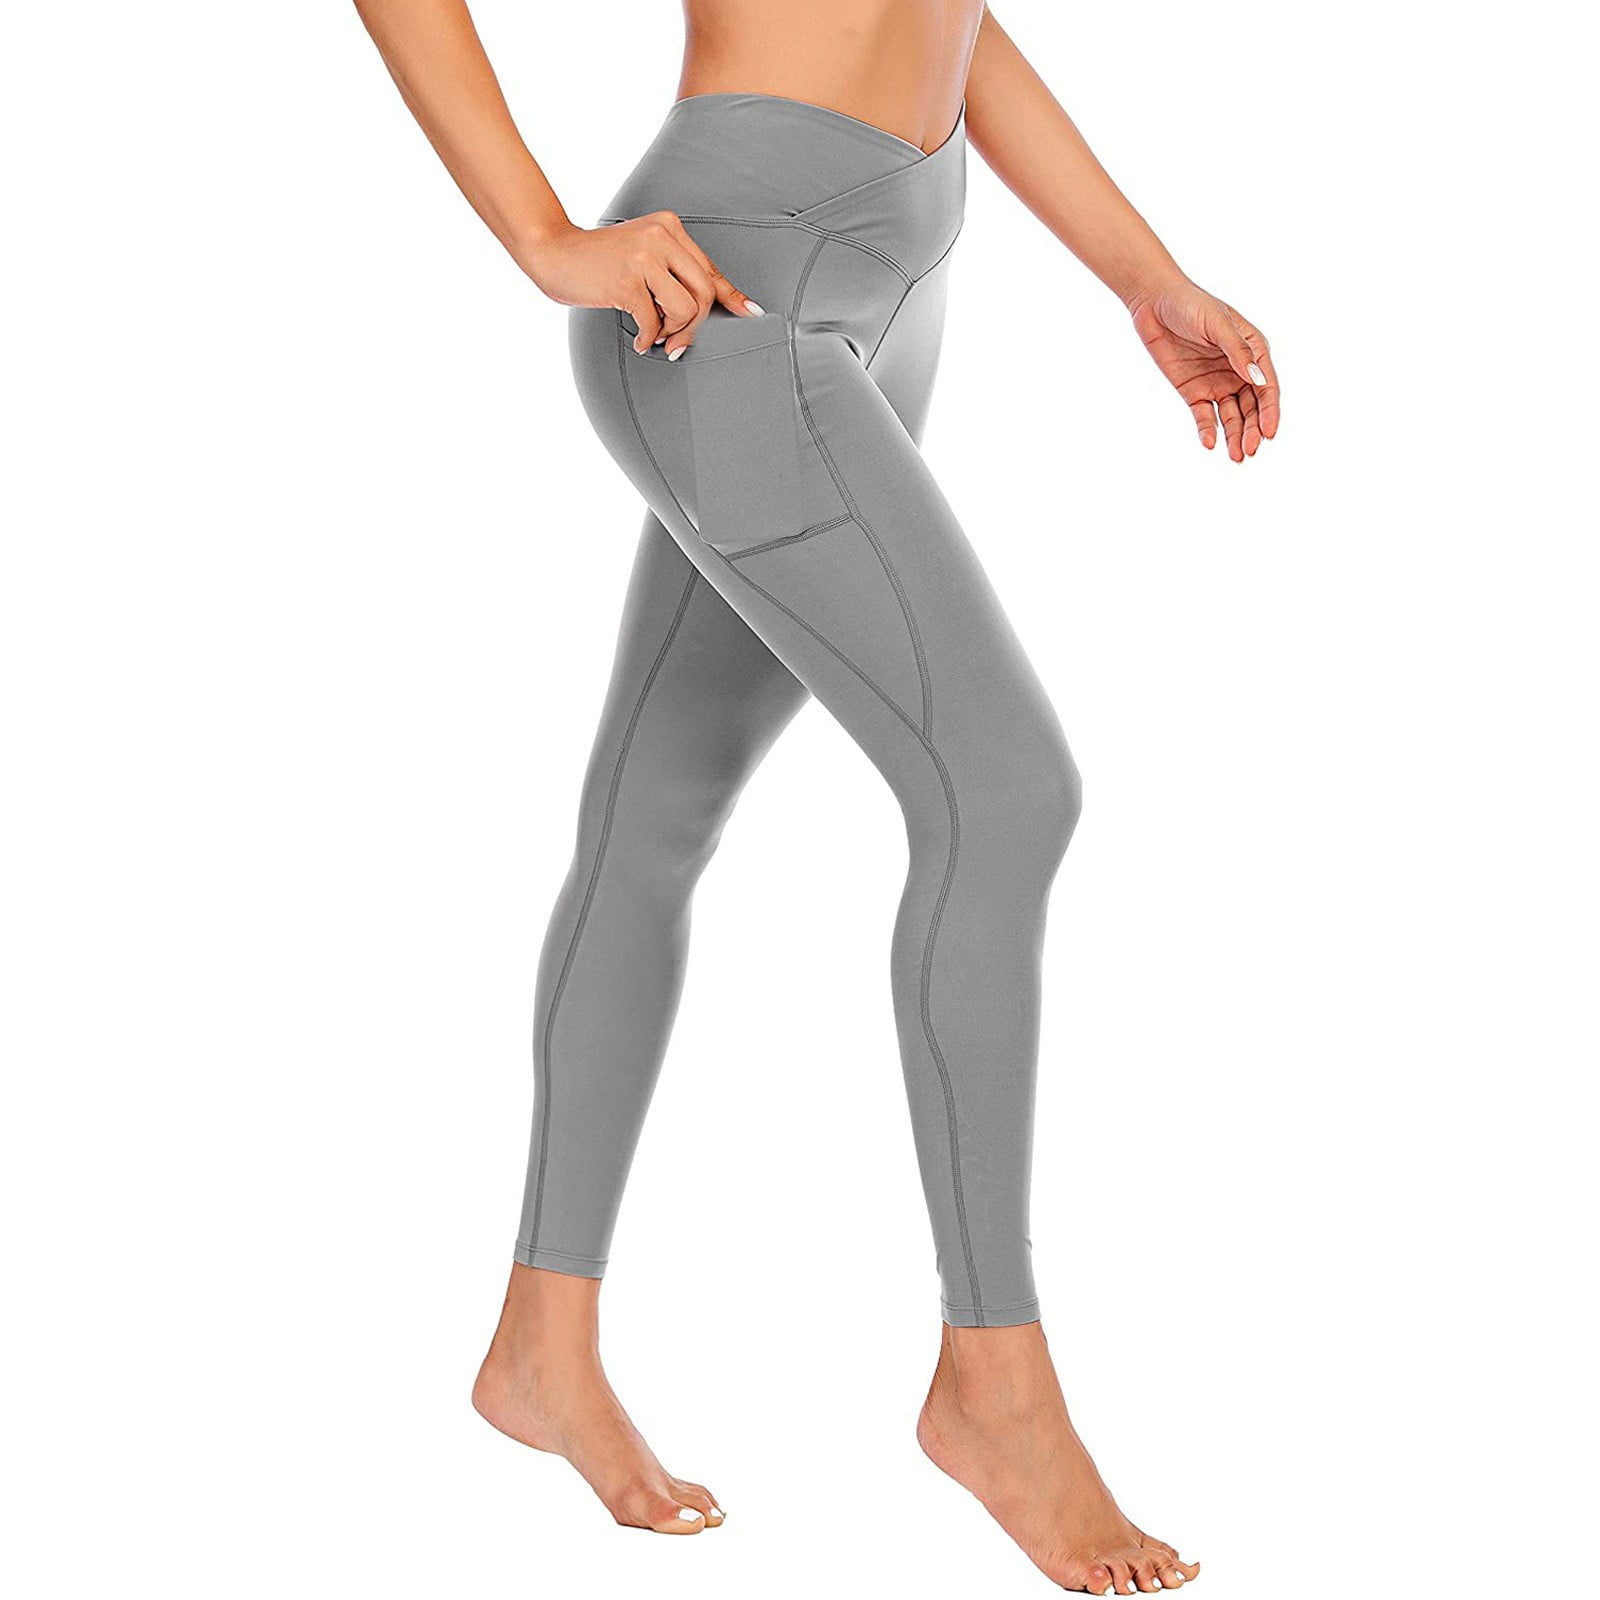 Aayomet Workout Out Running Leggings Sports Fitness Athletic Yoga